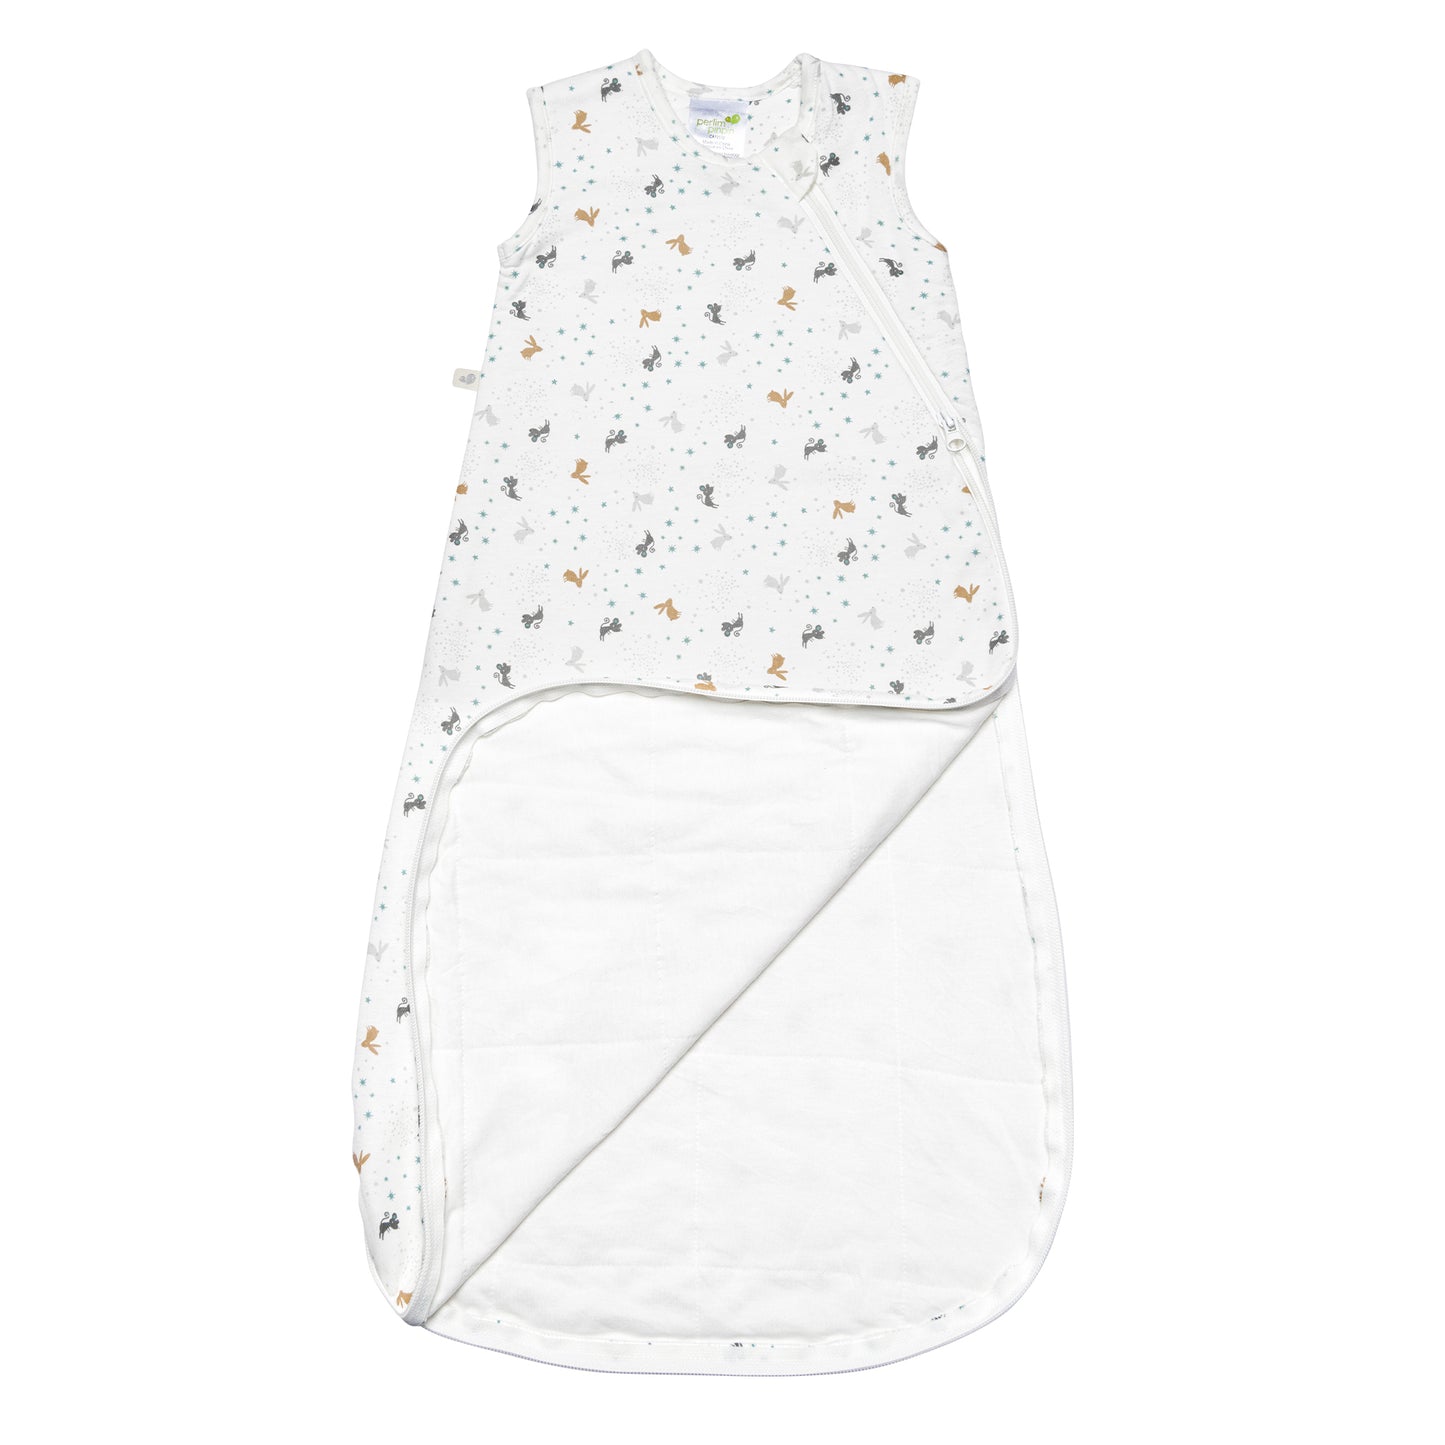 Quilted bamboo sleep sack - Mice (2.5 togs)